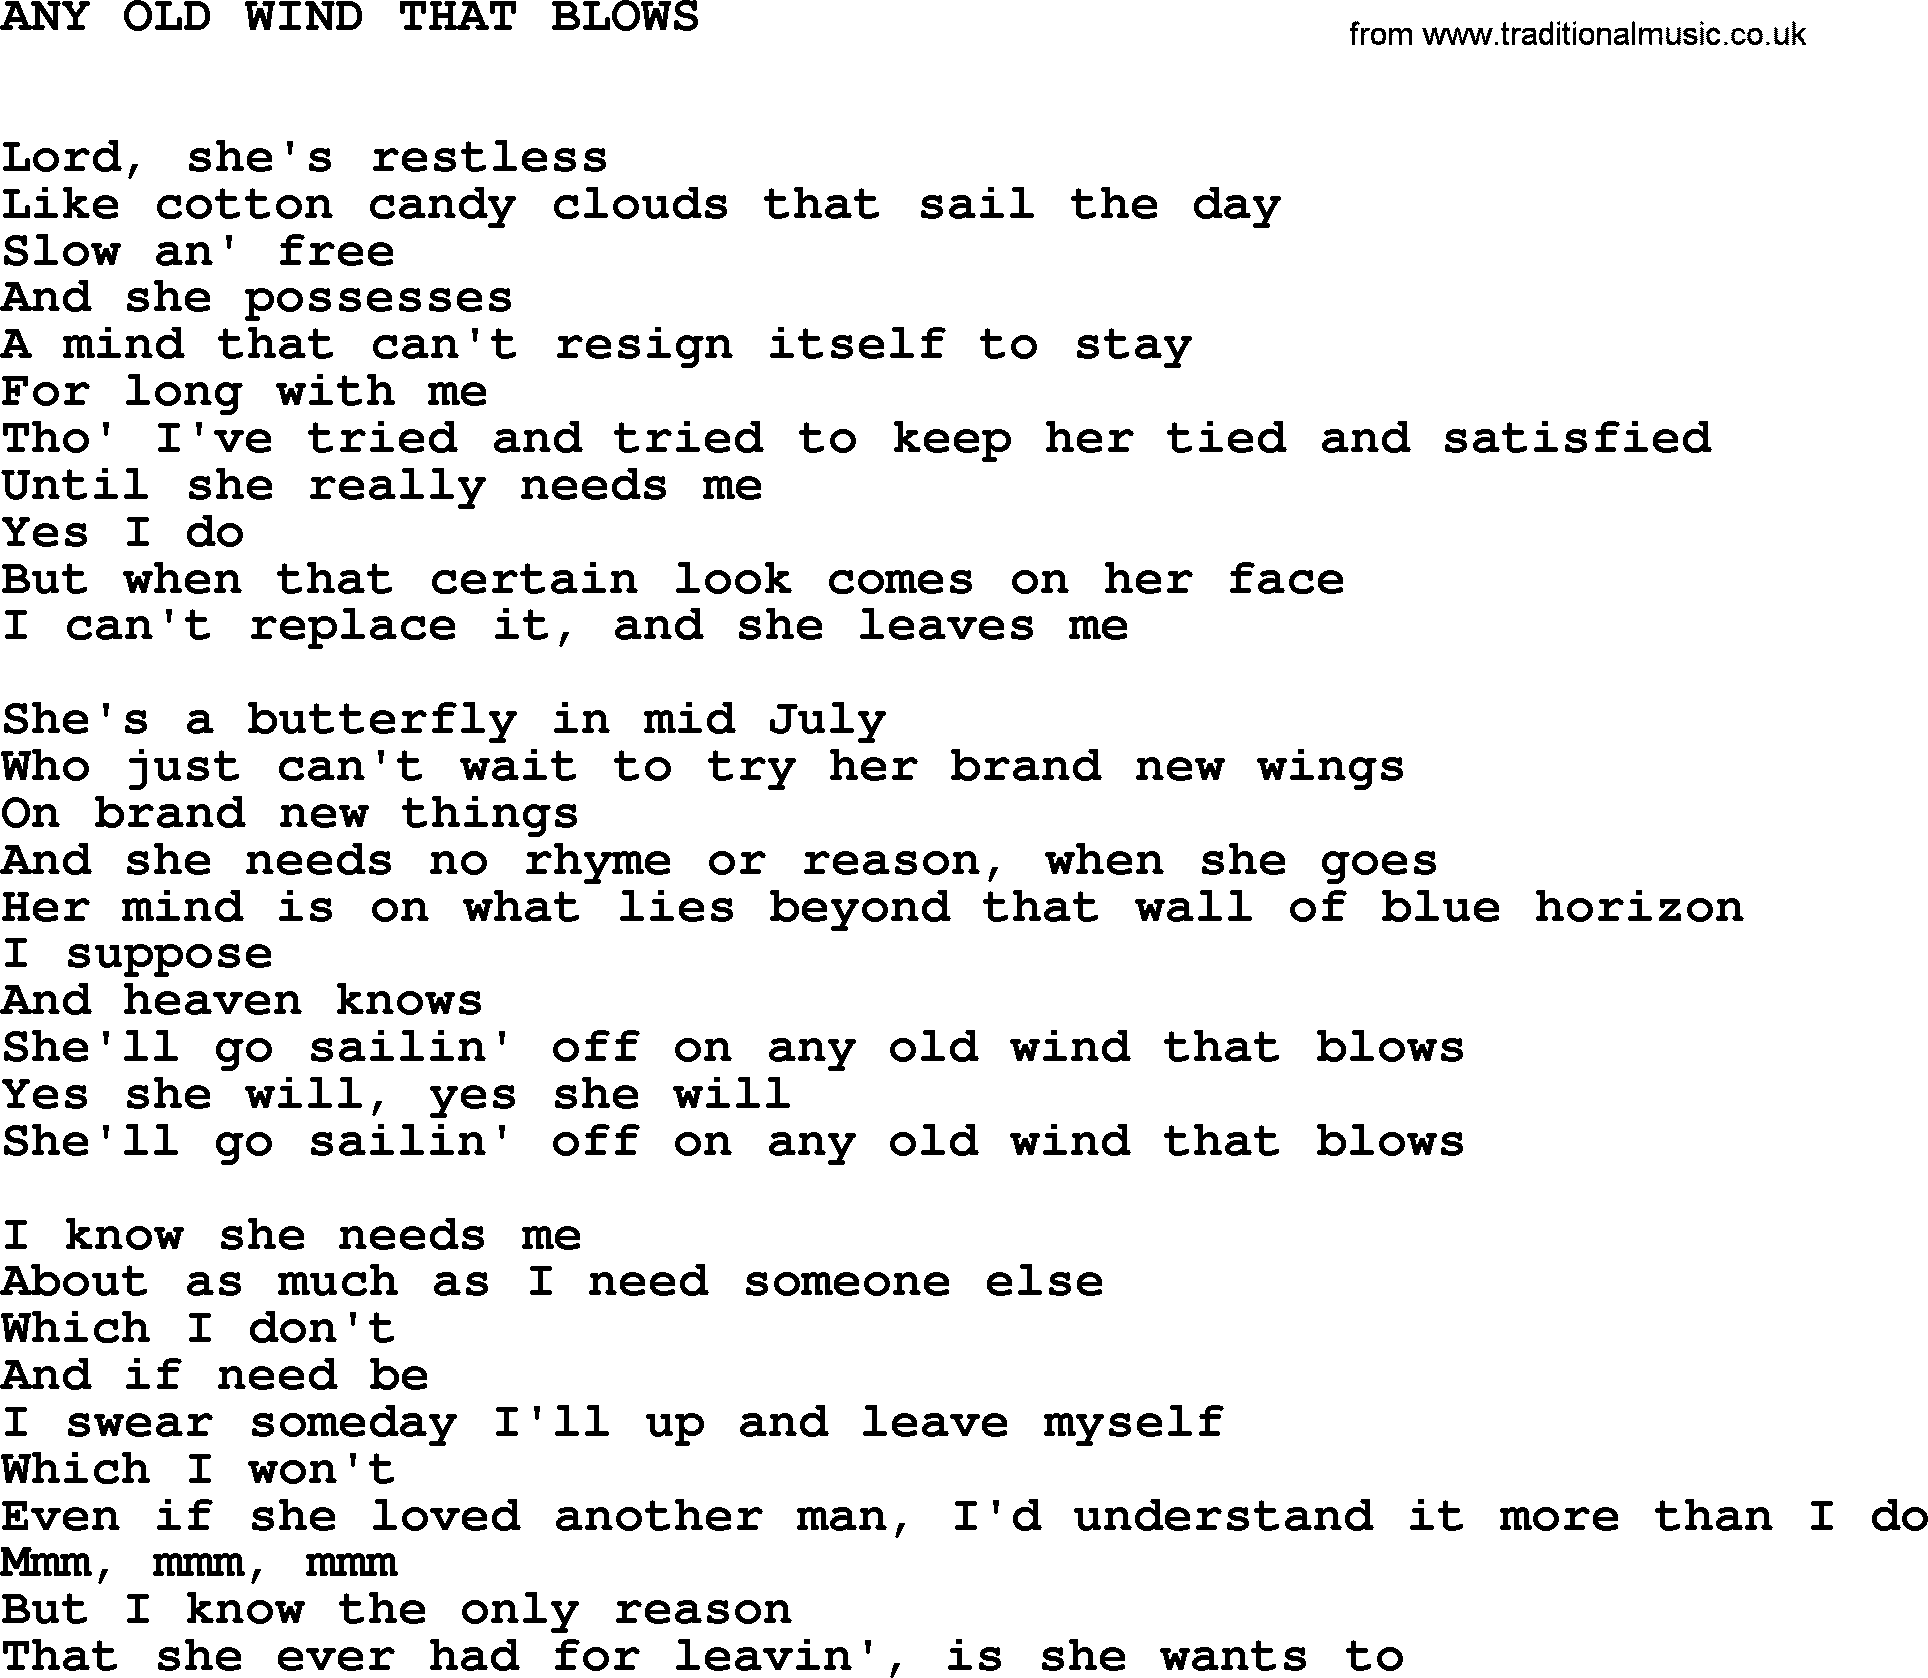 Johnny Cash song Any Old Wind That Blows.txt lyrics